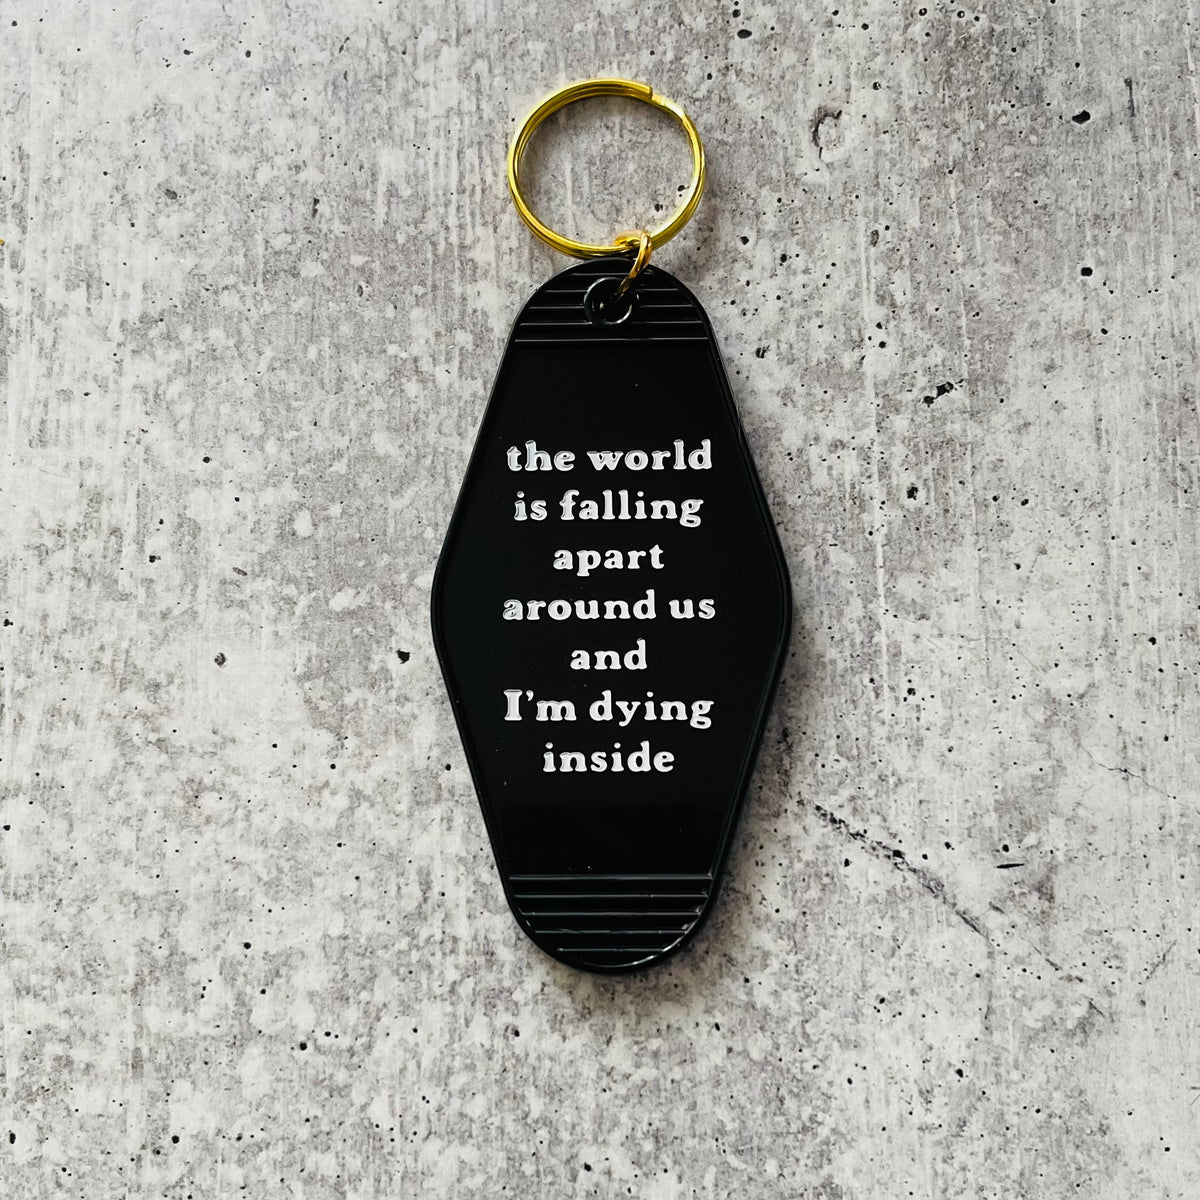 Are we having fun yet hotel Motel Keychain – The Silver Spider